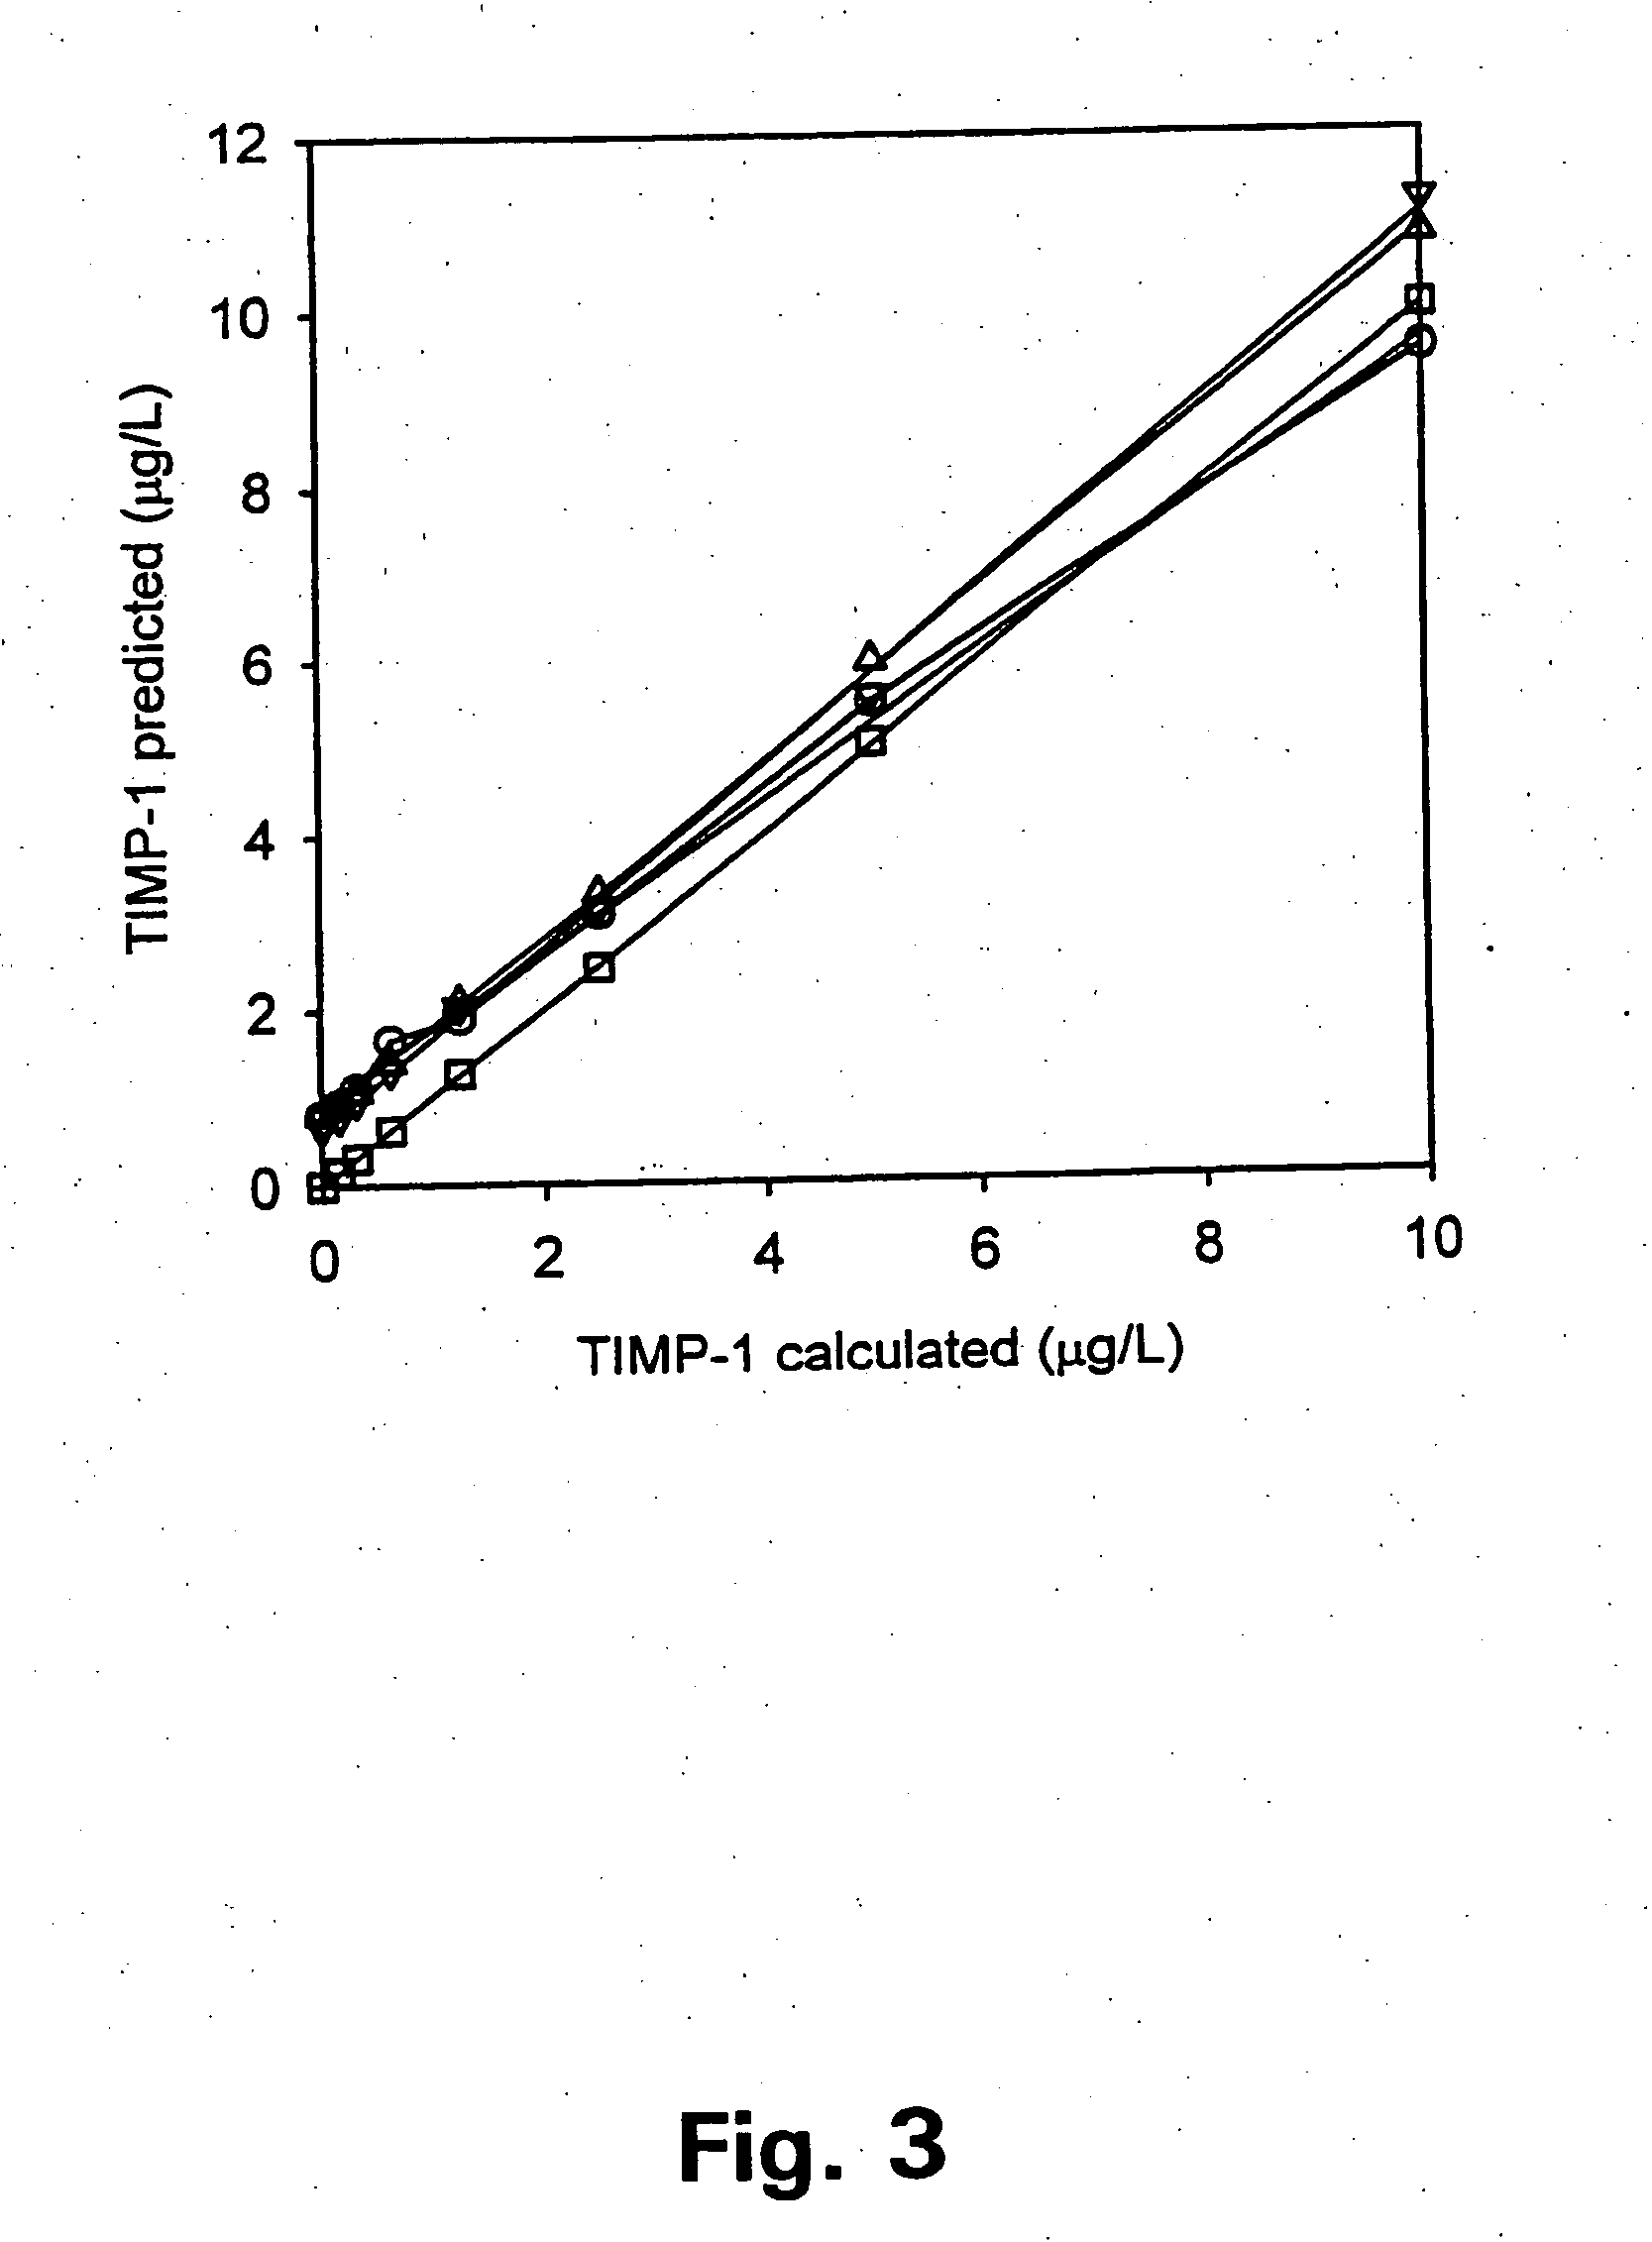 Tissue inhibitor of matrix metalloproteinases type-1 (TIMP-1) as a cancer marker